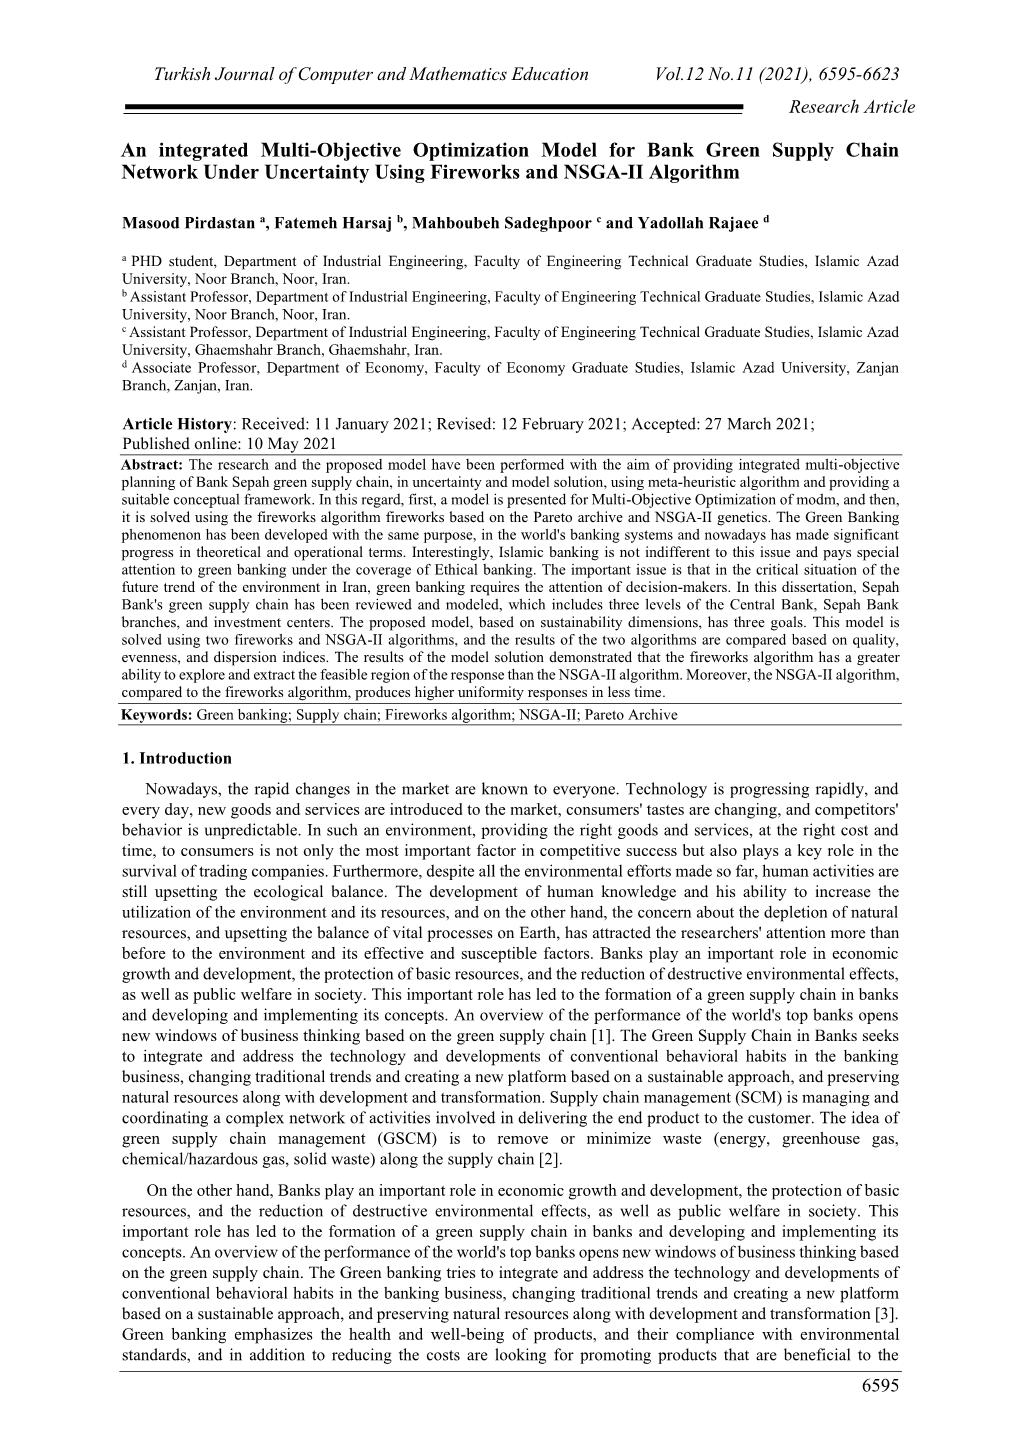 An Integrated Multi-Objective Optimization Model for Bank Green Supply Chain Network Under Uncertainty Using Fireworks and NSGA-II Algorithm